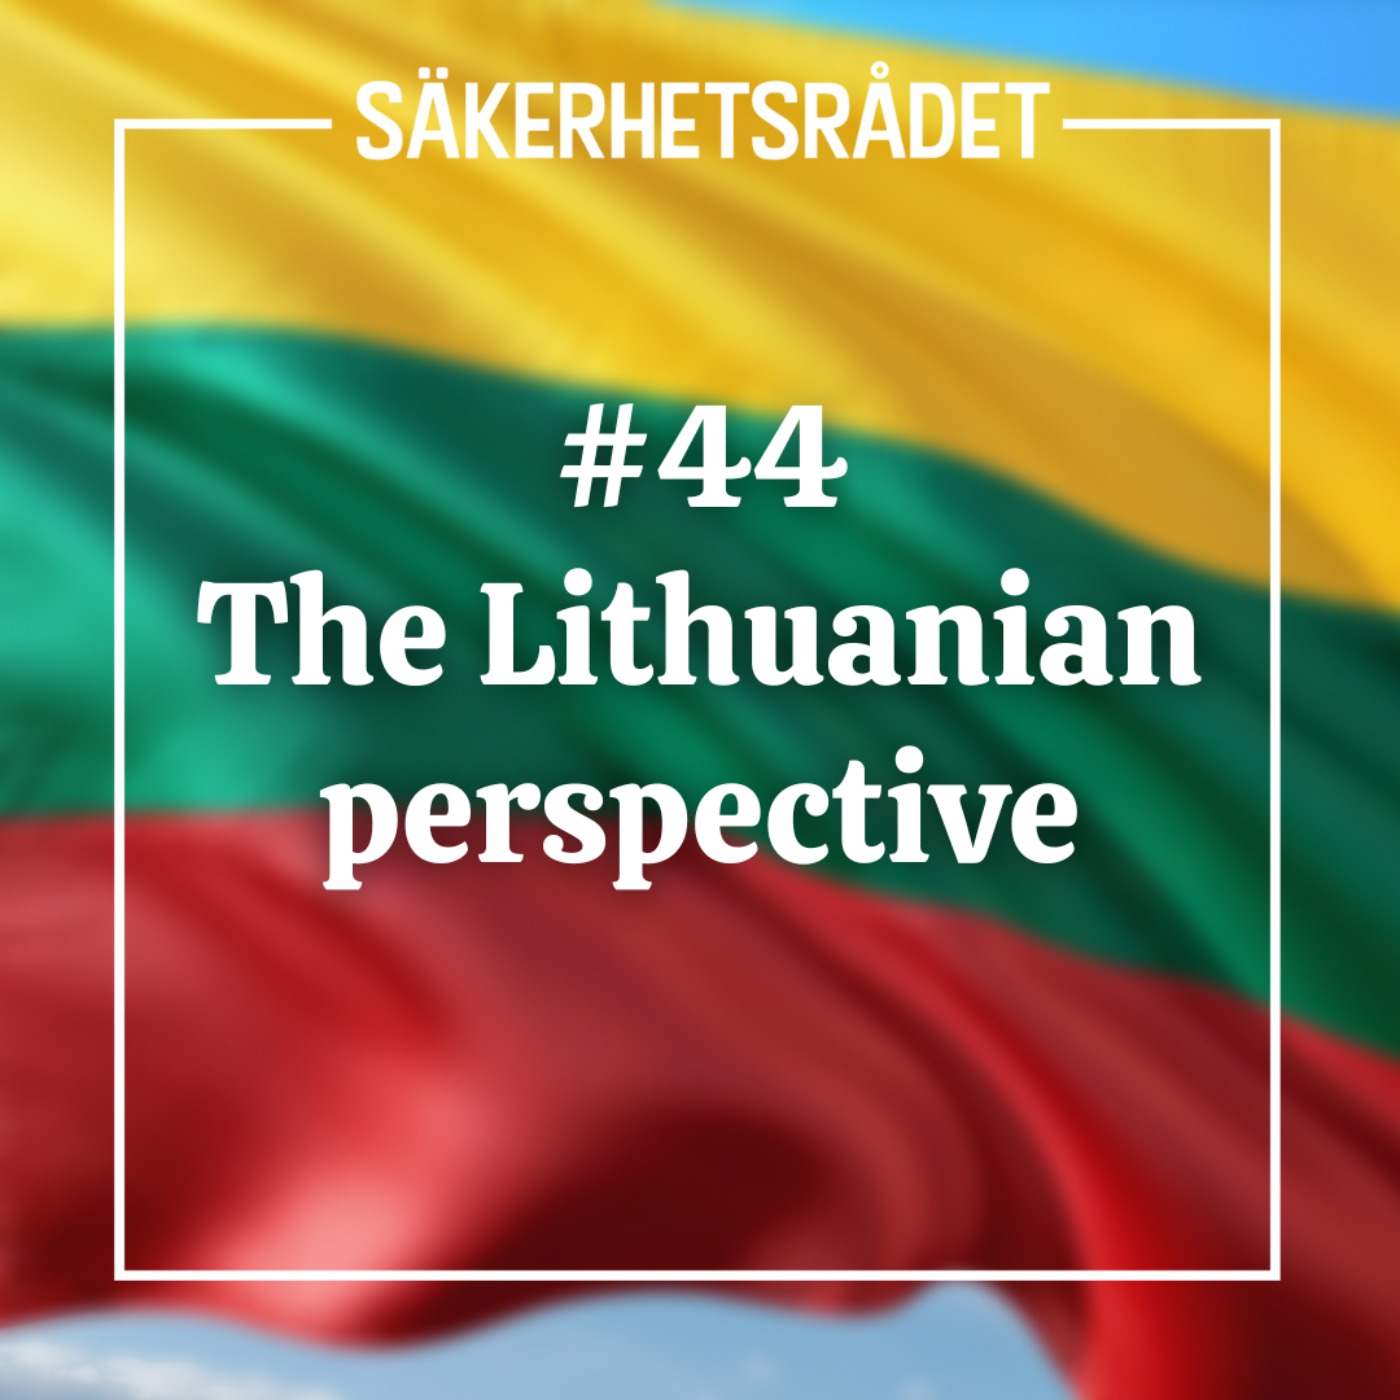 The Lithuanian perspective